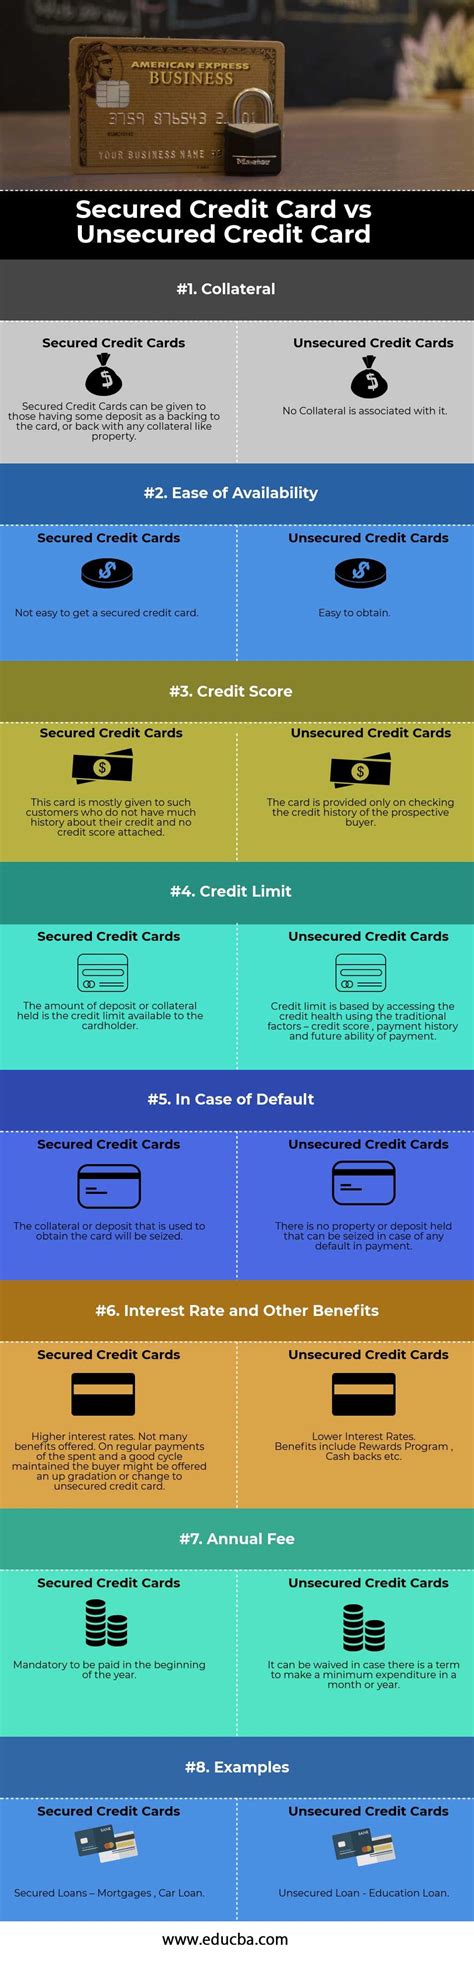 Evaluate credit card terms and features, and get all your credit card questions answered here. Secured vs Unsecured Credit Card | Rewards credit cards, Unsecured credit cards, Best credit cards